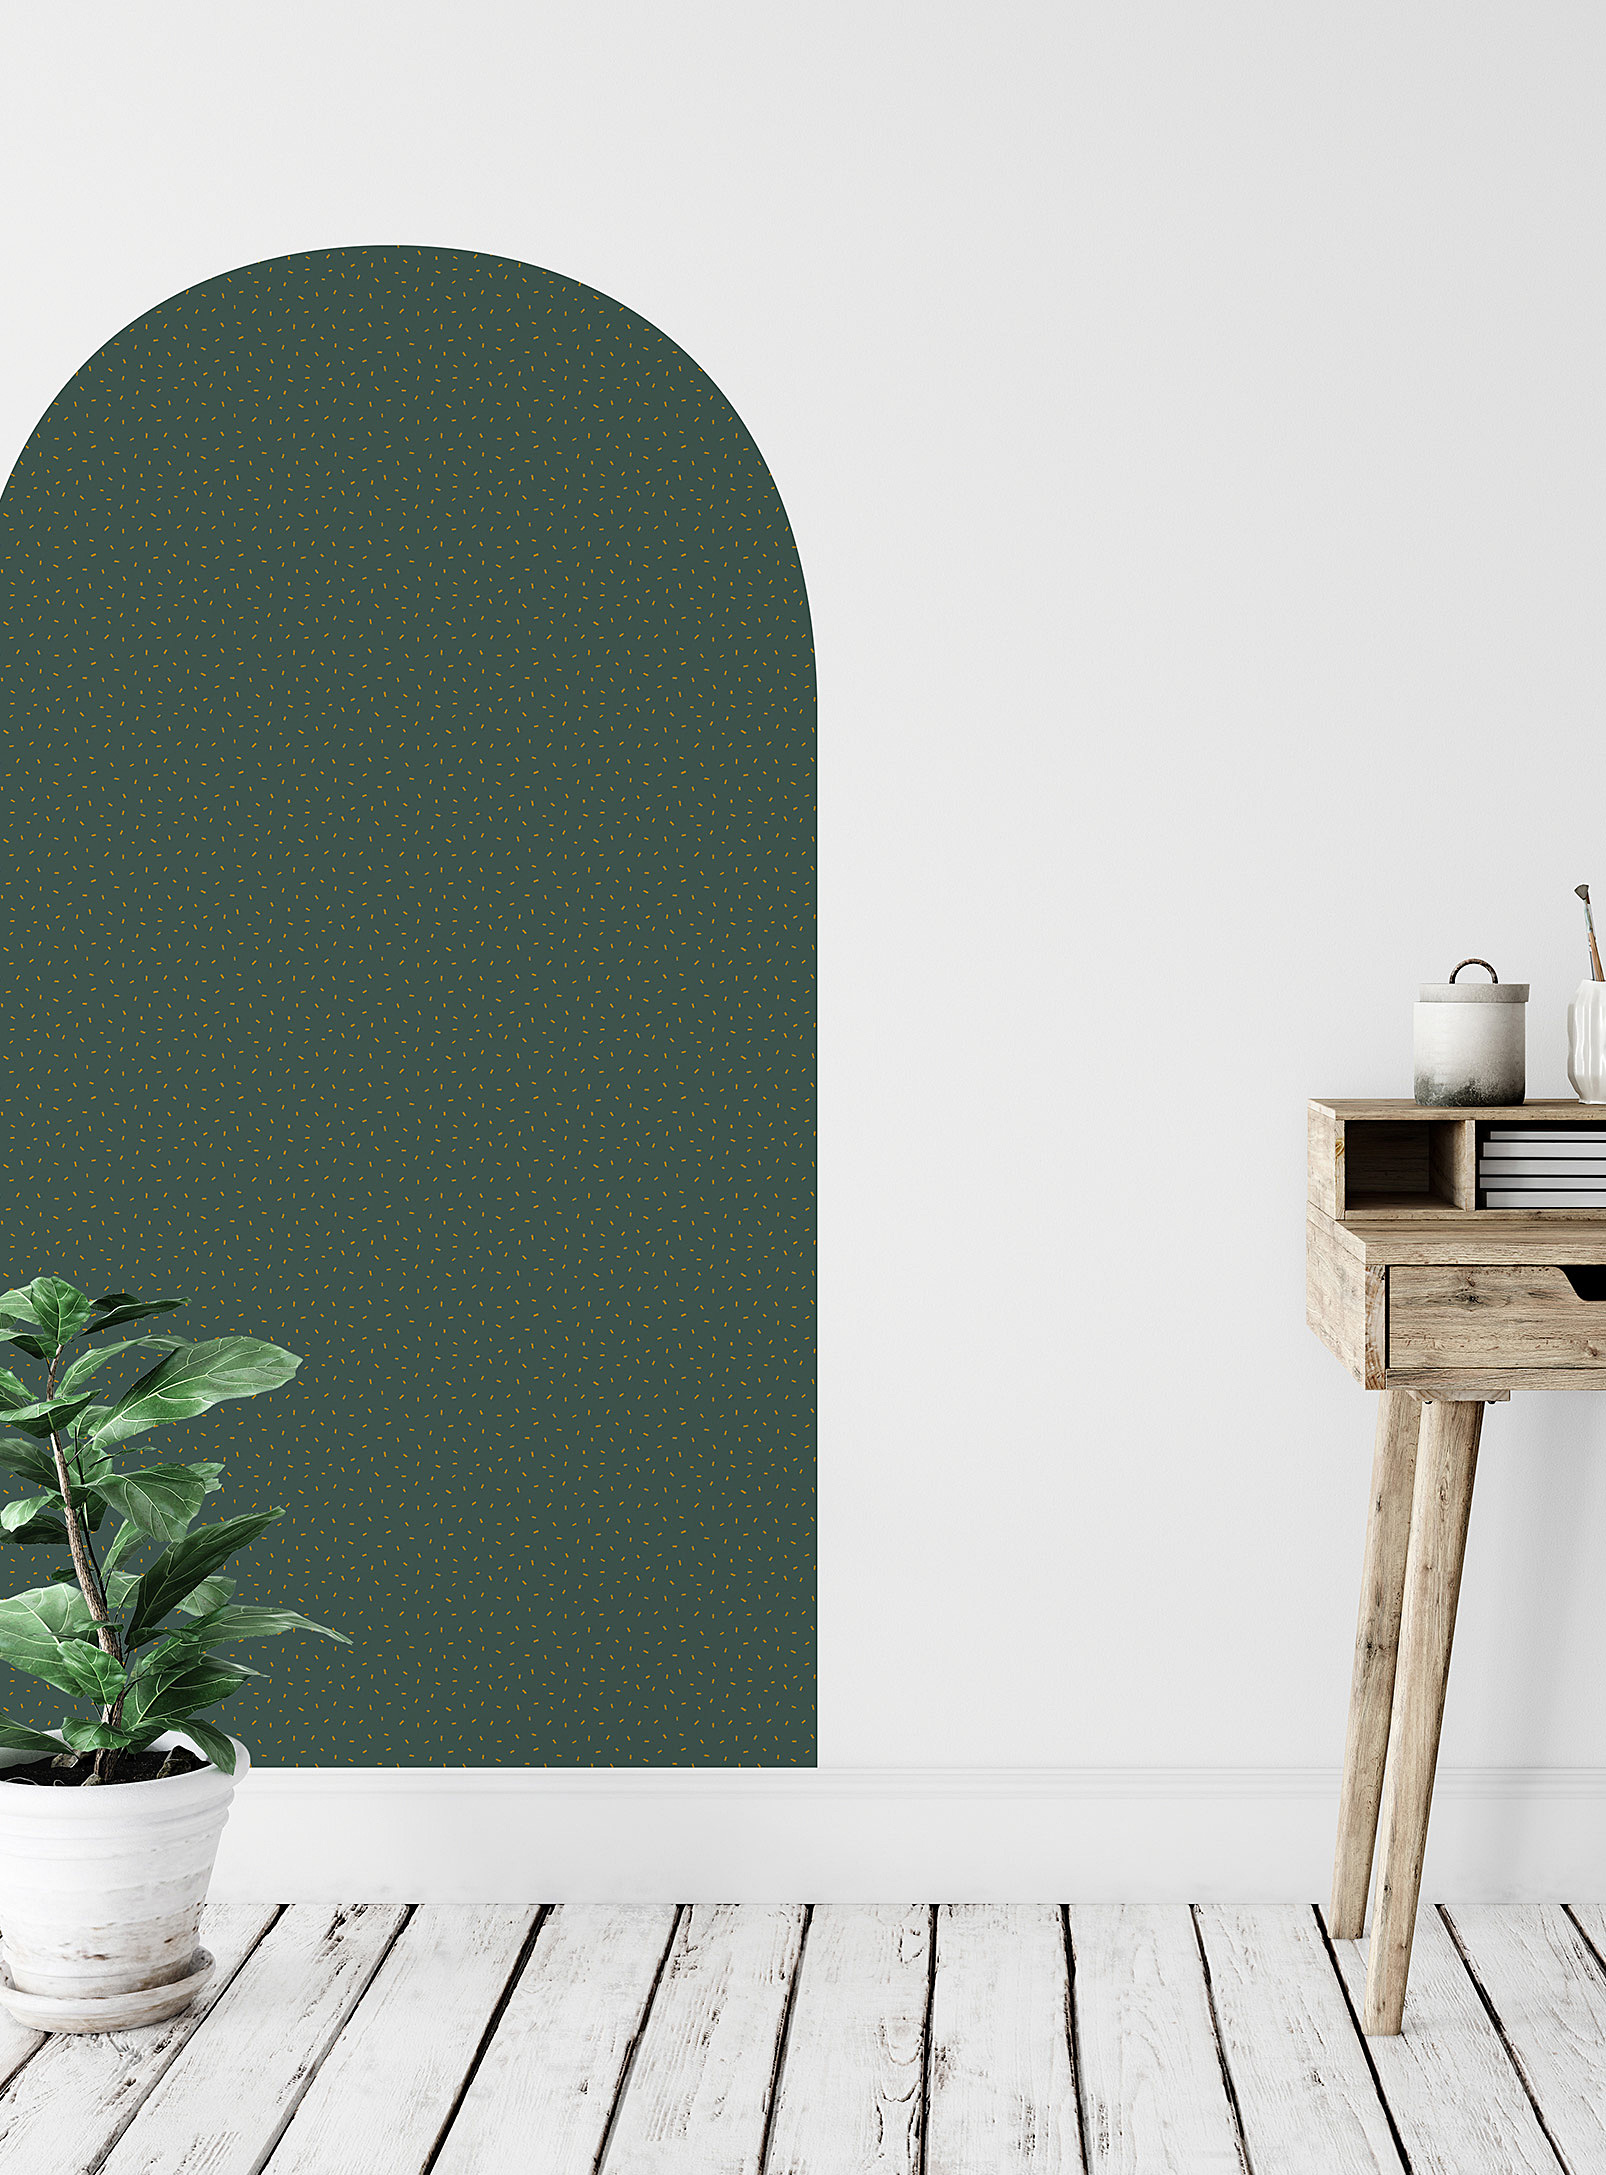 Meraki L'arche De Noé Pop Wall Decal In Collaboration With Artist Marie-france Auger In Mossy Green